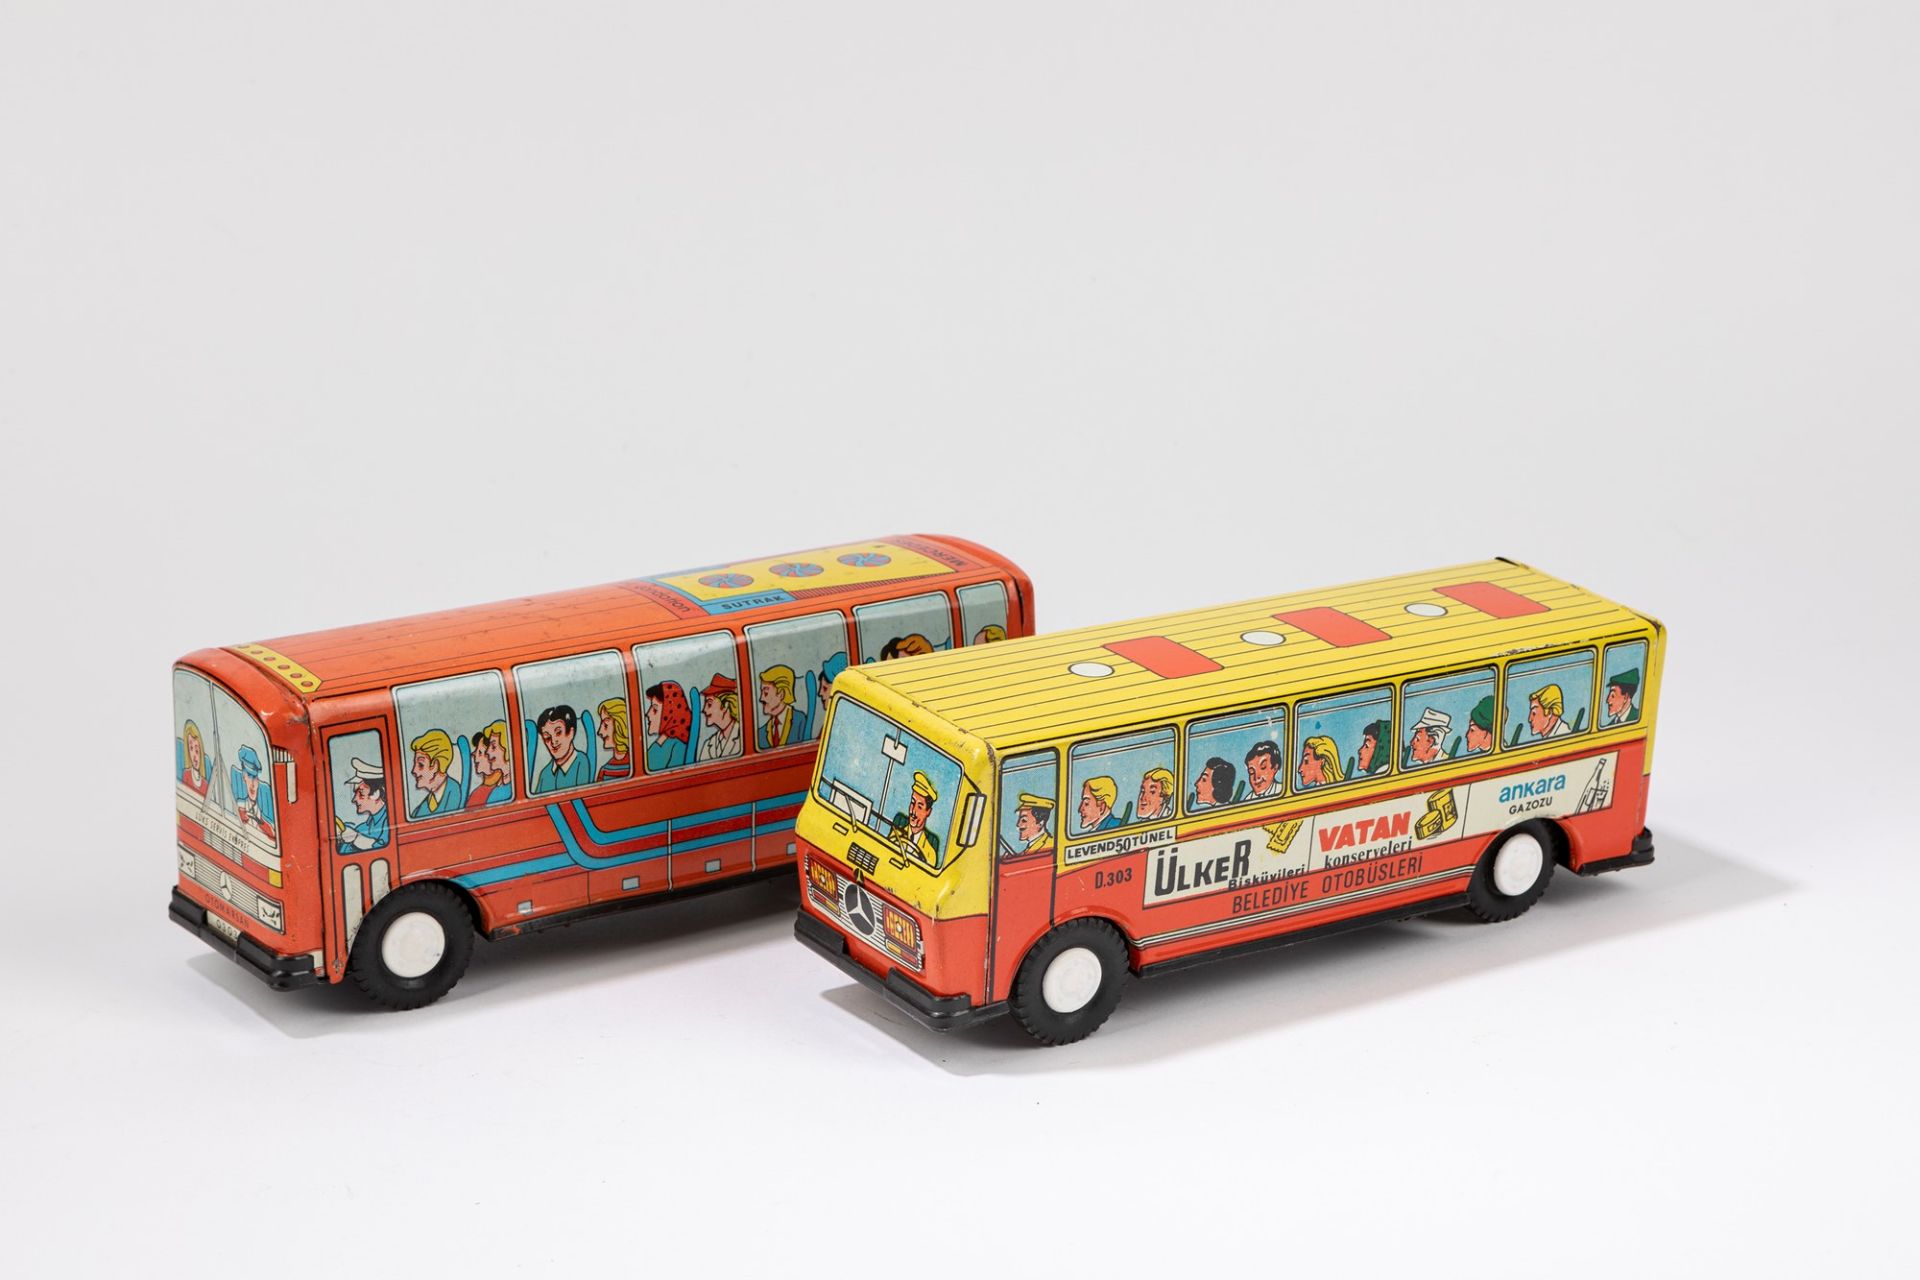 Two turkey buses, 1960-1965